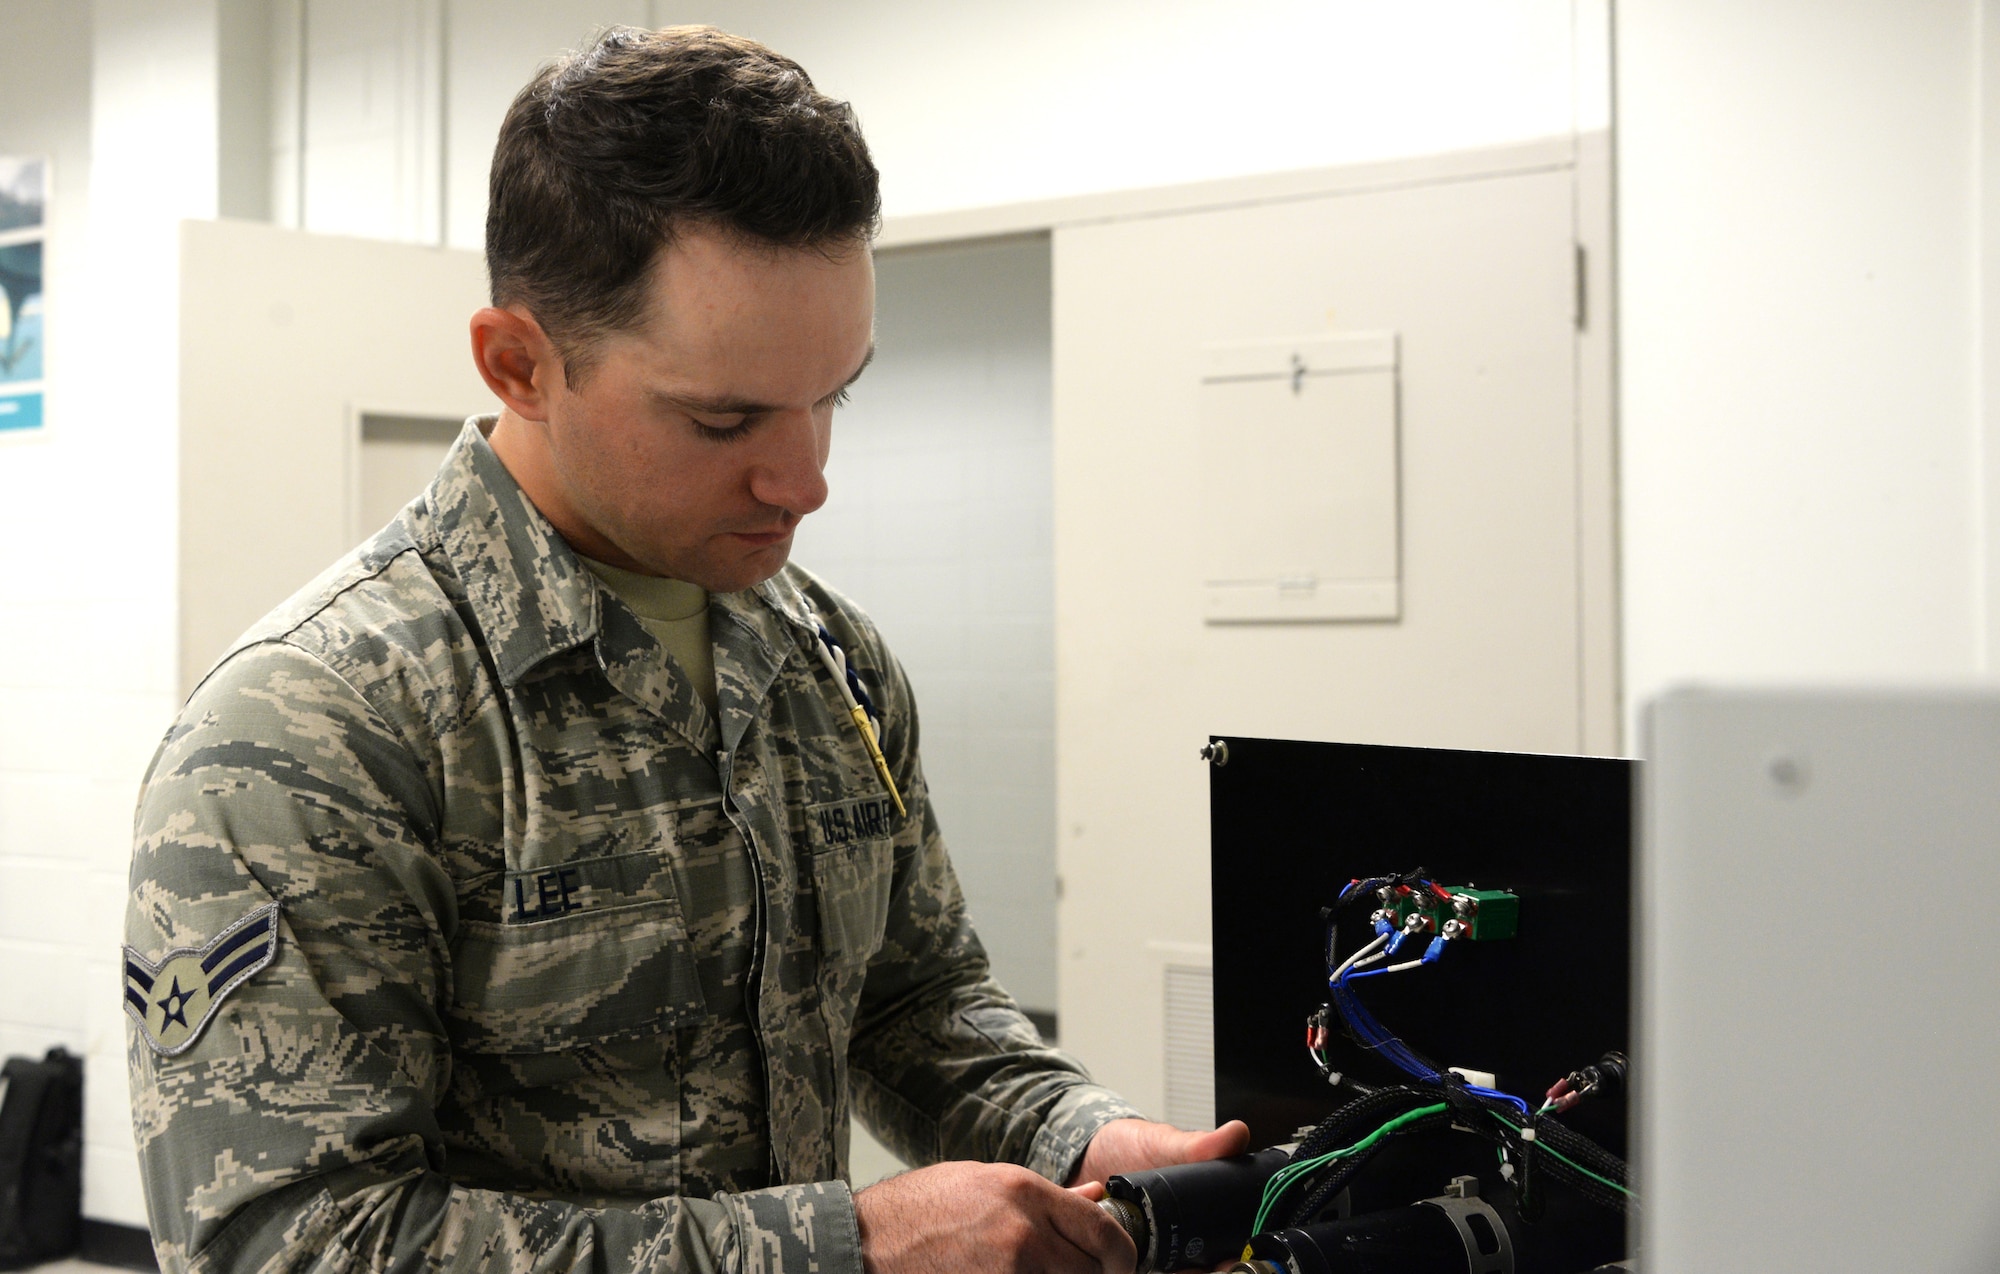 Airman uses a digital fuel quantity trainer at Sheppard Air Force Base, Texas, Oct. 2, 2019.